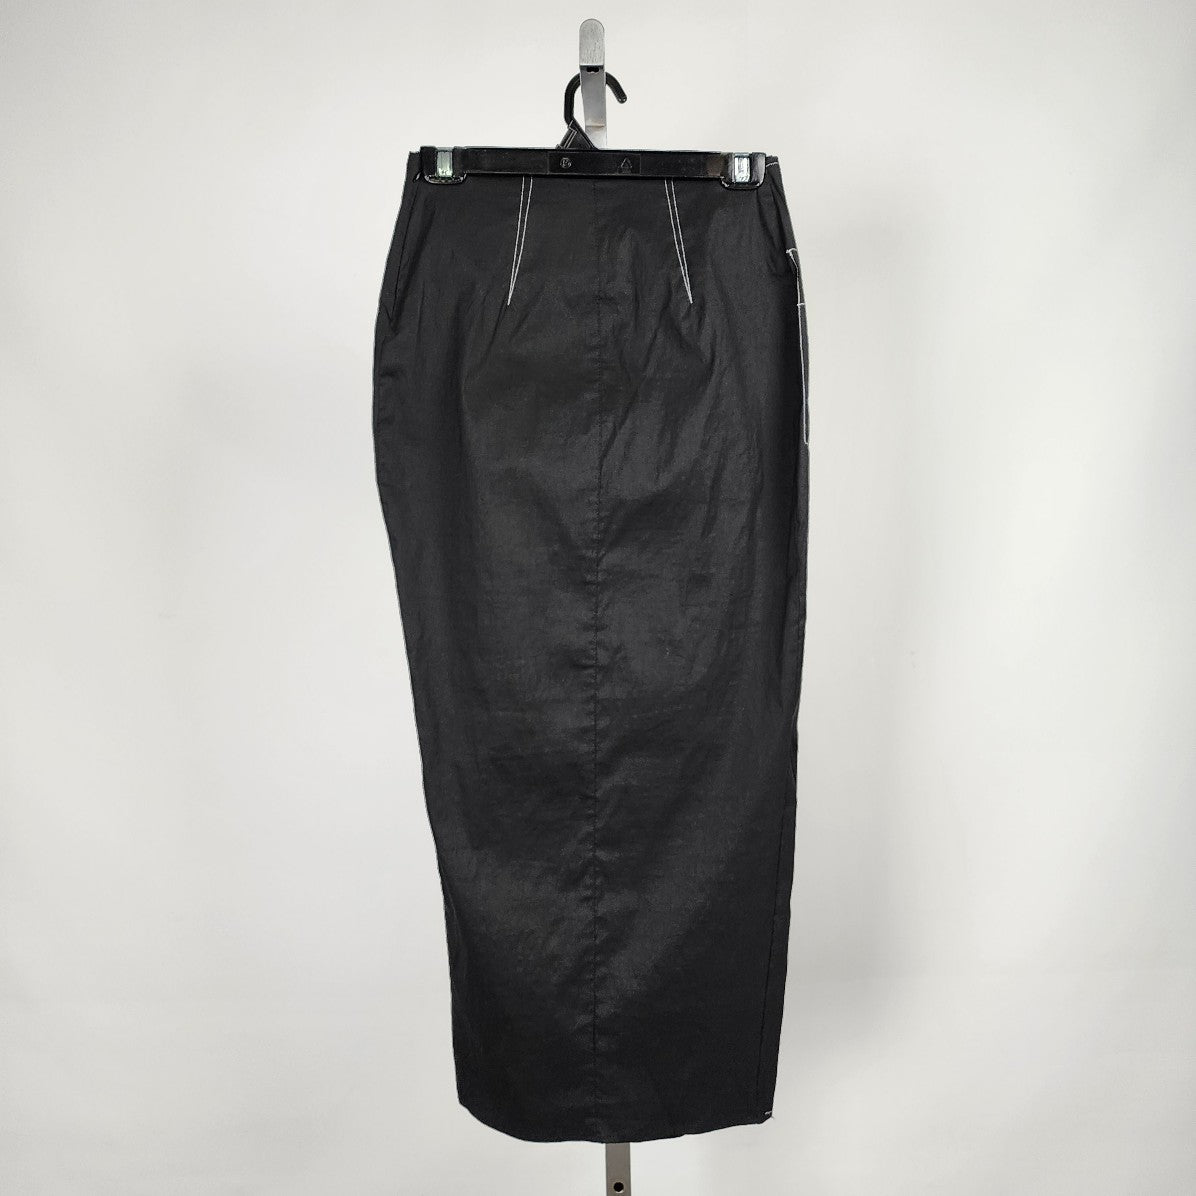 Sarah Pacini Made In Italy Black Linen Cotton Pencil Long Skirt Size 0